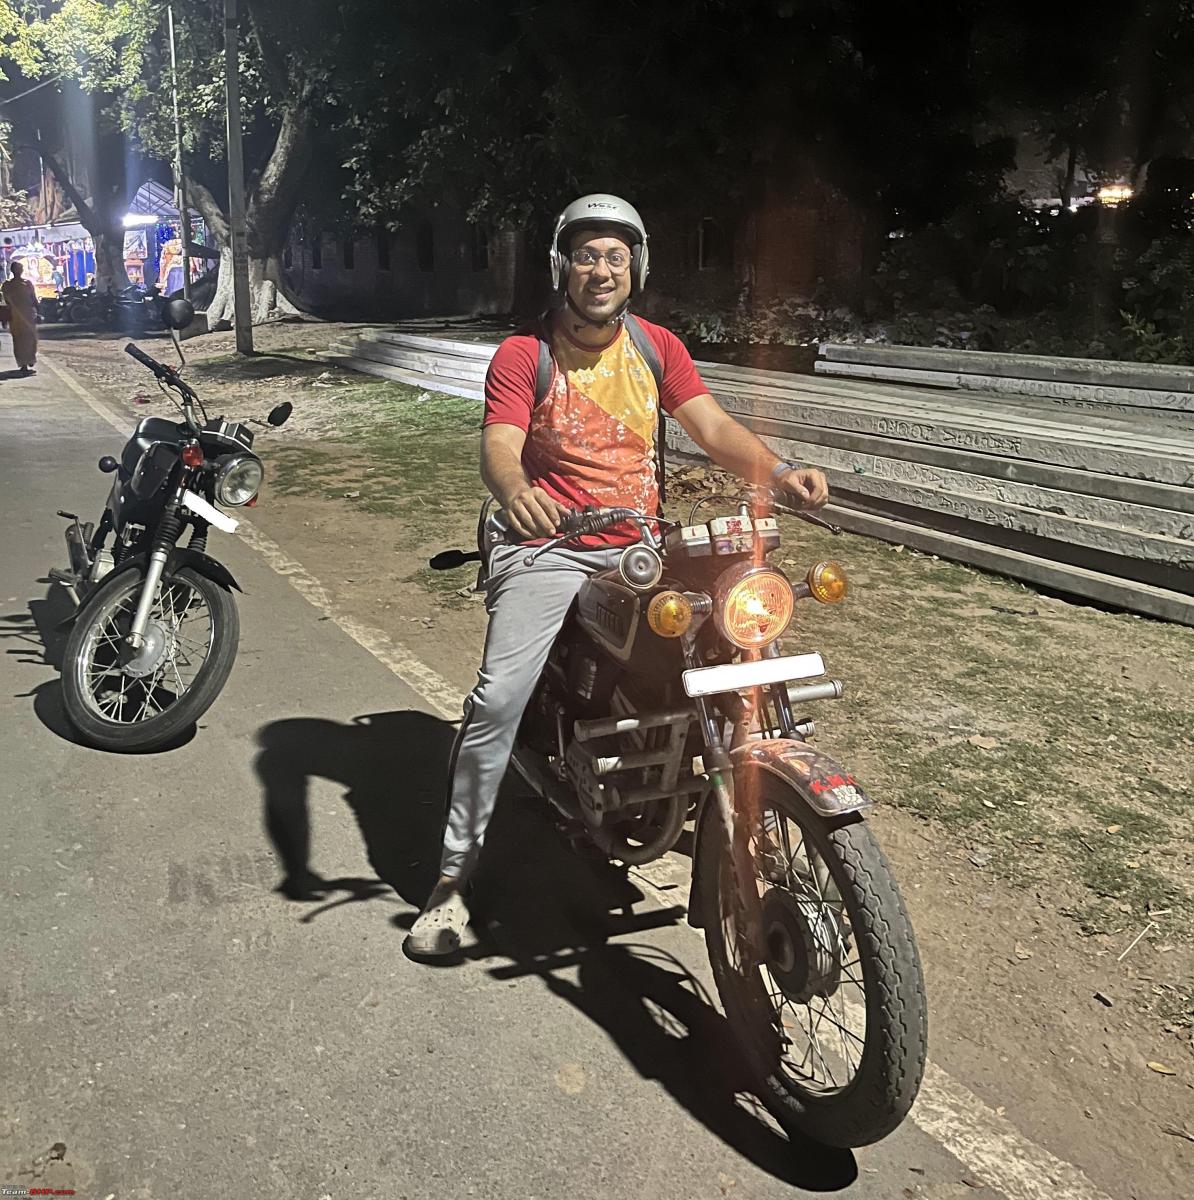 Yamaha RX100: How a Honda CB350 owner fell in love with 2-stroke bikes, Indian, Member Content, Yamaha RX100, Restoration, CB350 Highness